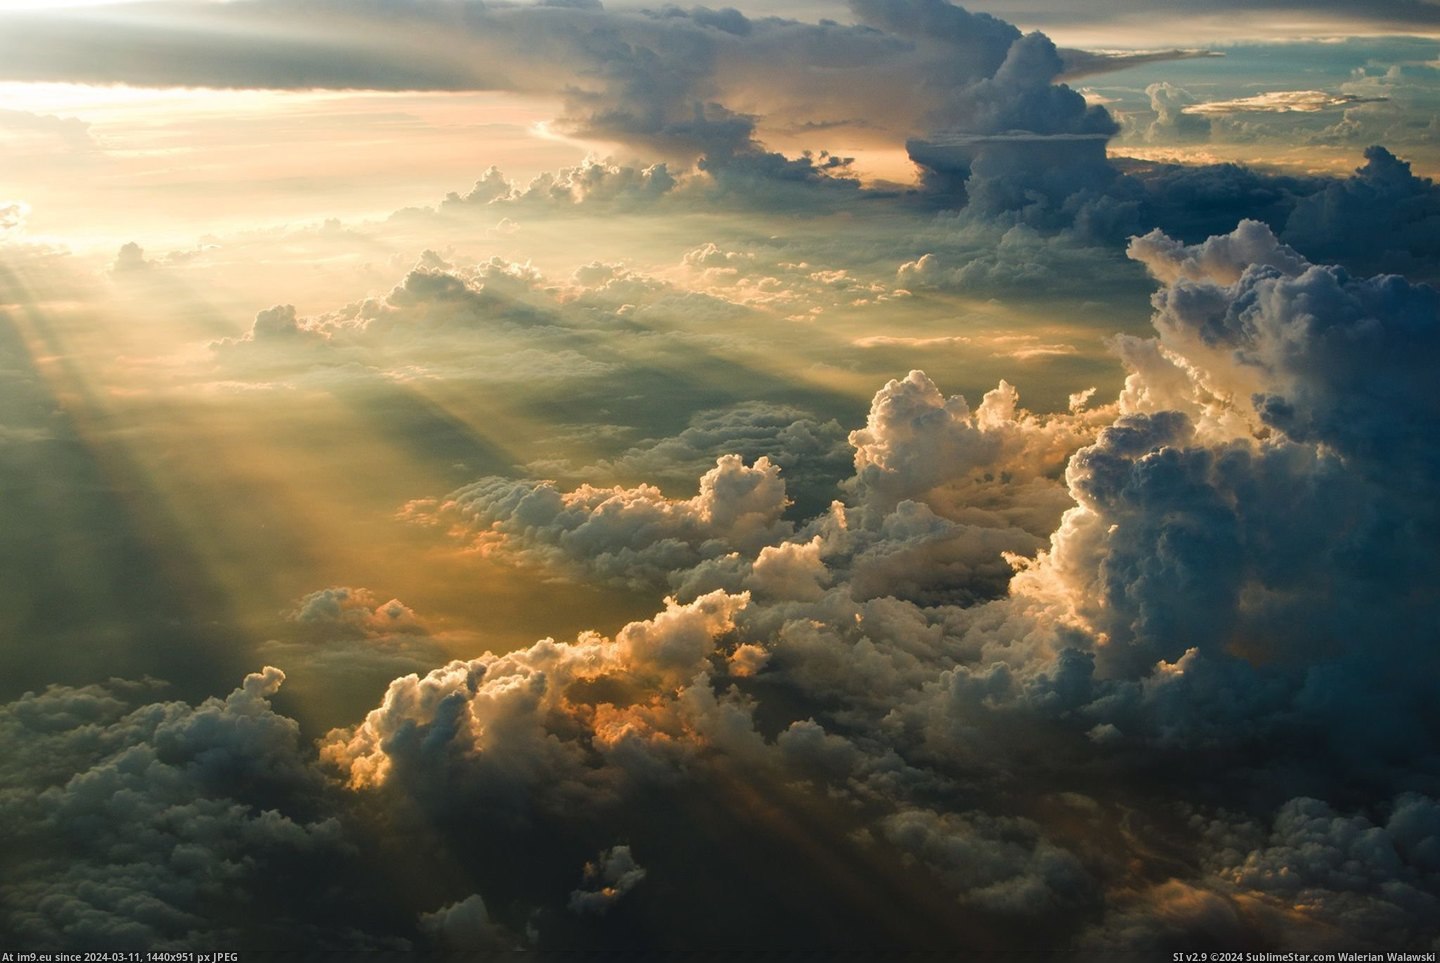 #Sunset #Clouds #Awesome [Pics] Awesome sunset over the clouds Pic. (Image of album My r/PICS favs))